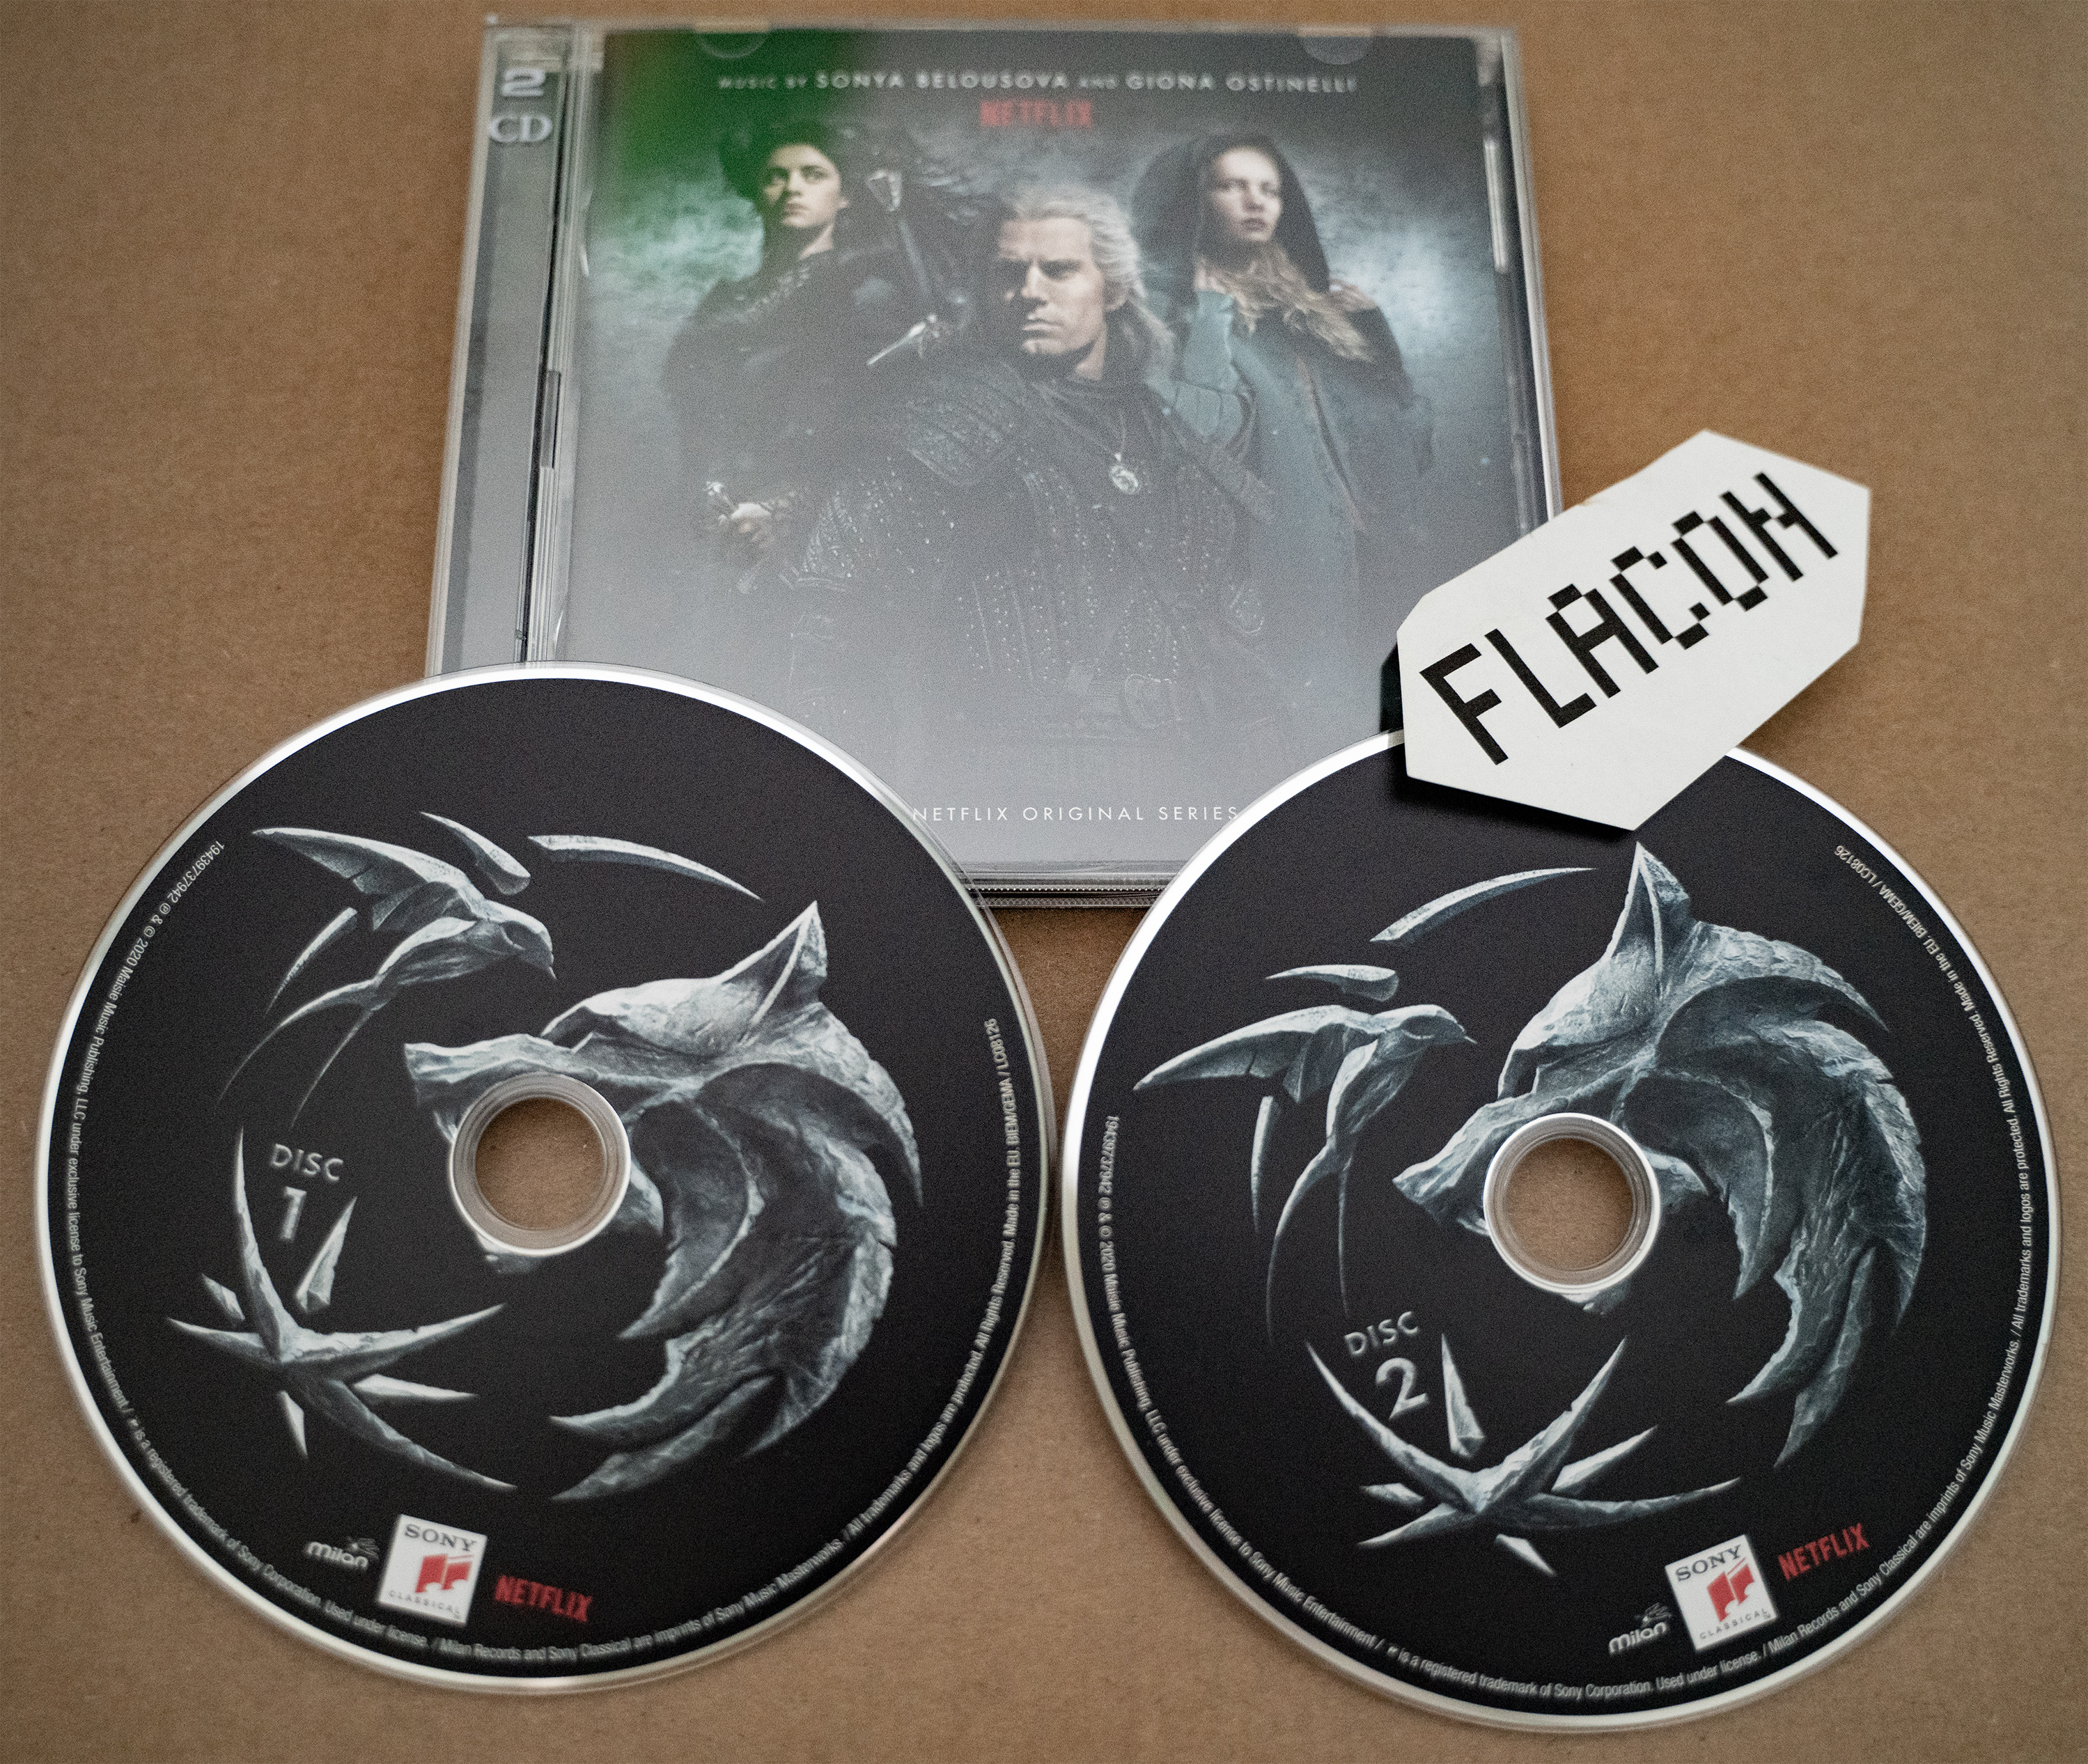 Sonya Belousova and Giona Ostinelli-The Witcher Music From The Netflix Original Series-OST-2CD-FLAC-2020-FLACON